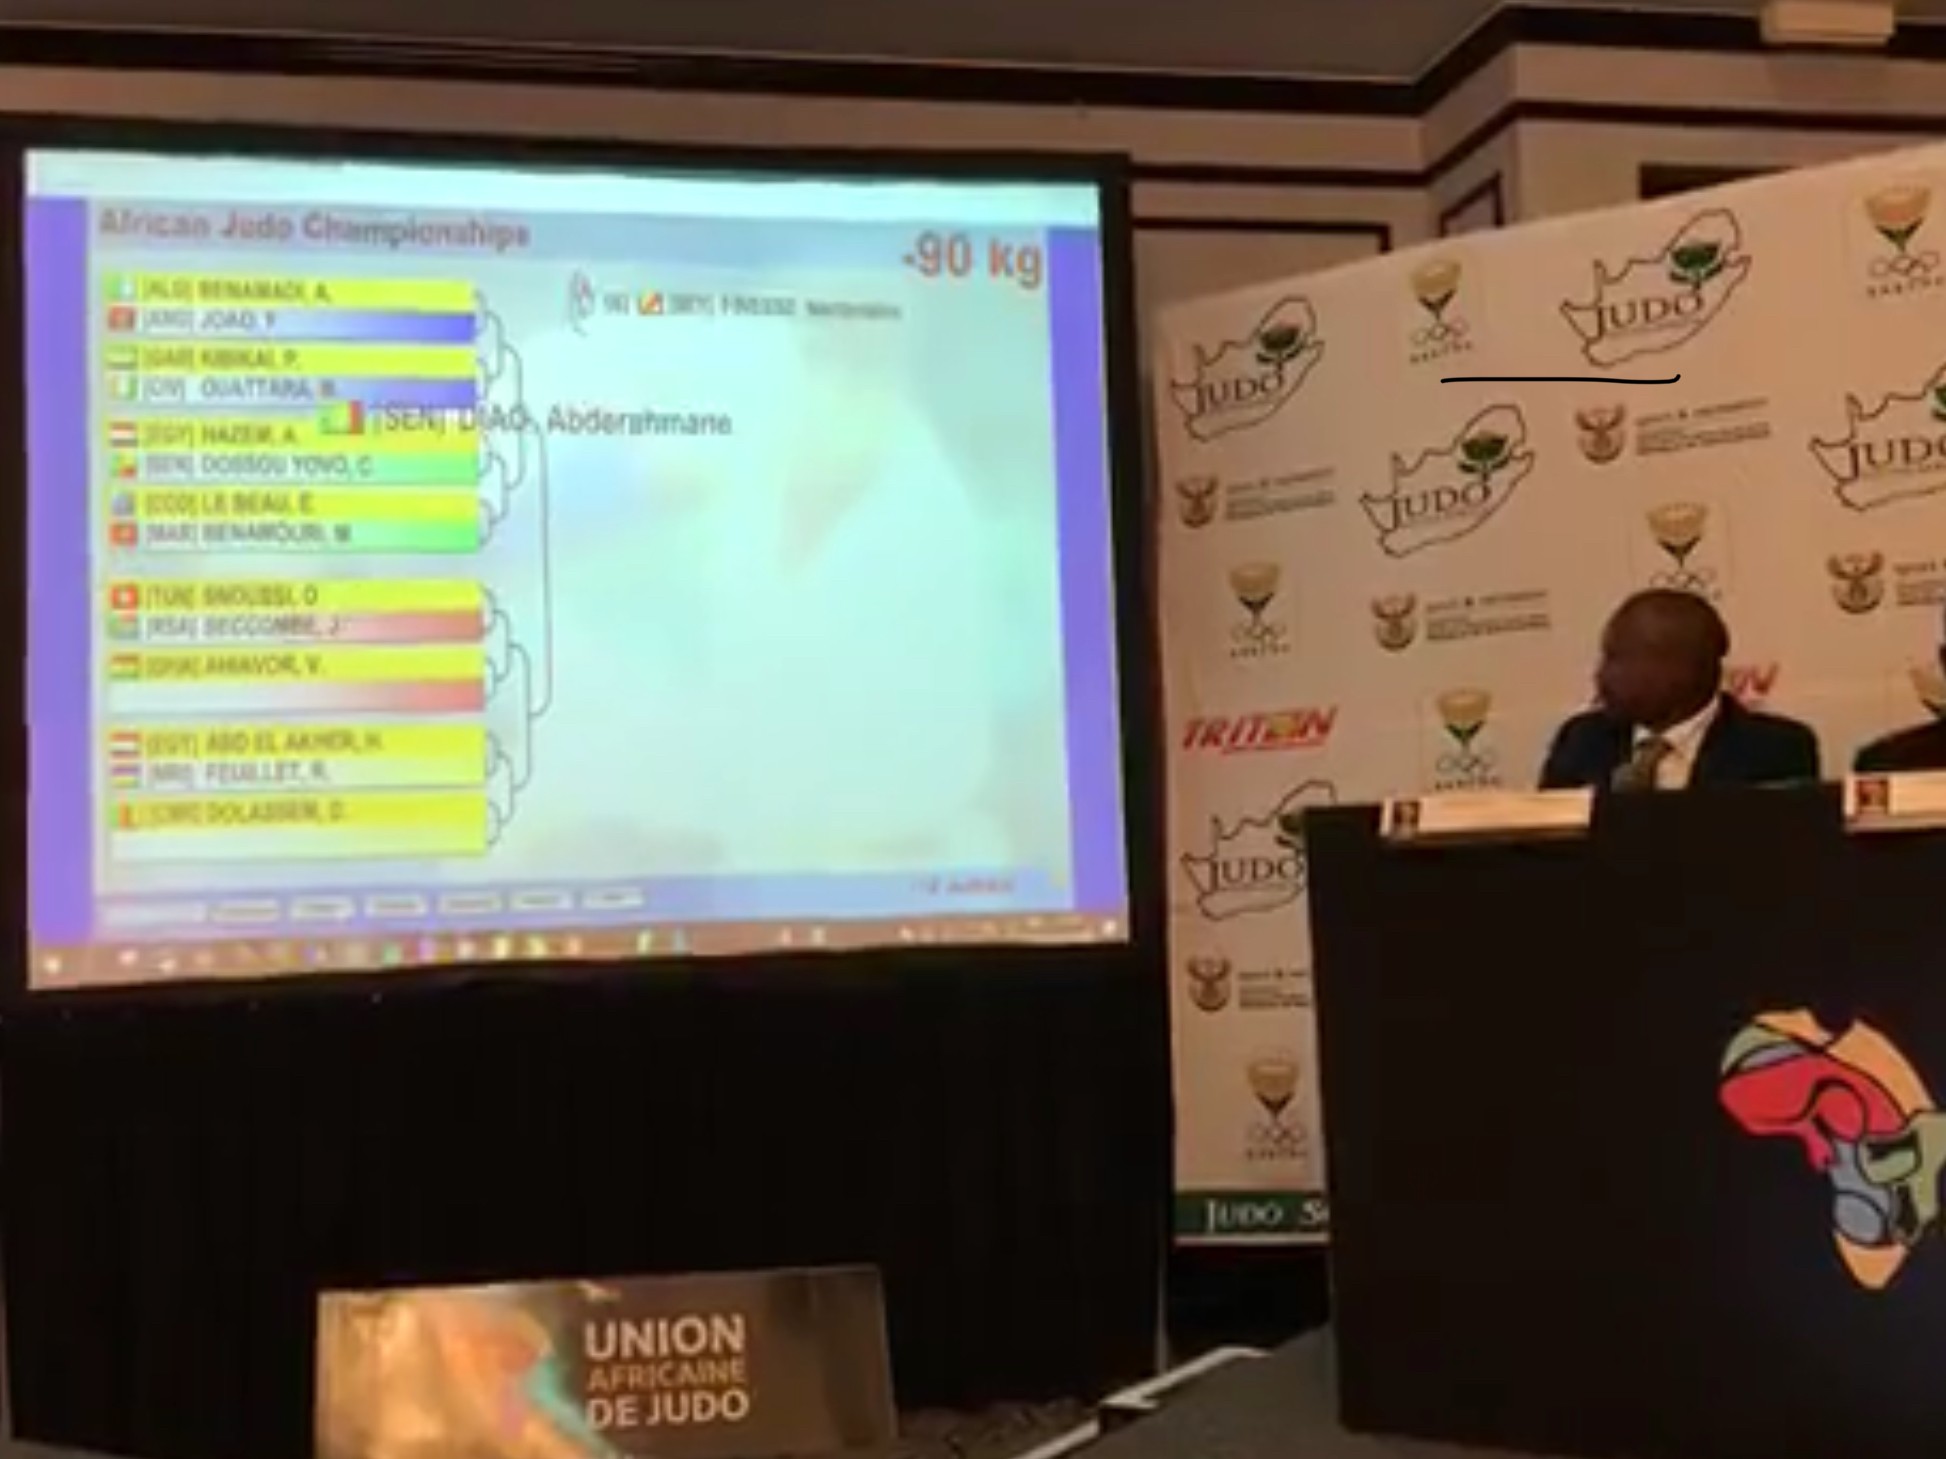 40th ÉDITION OF THE AFRICAN JUDO CHAMPIONSHIP-DRAW DRAWS THE COMPETITION IN SOUTH AFRICA / africajudo